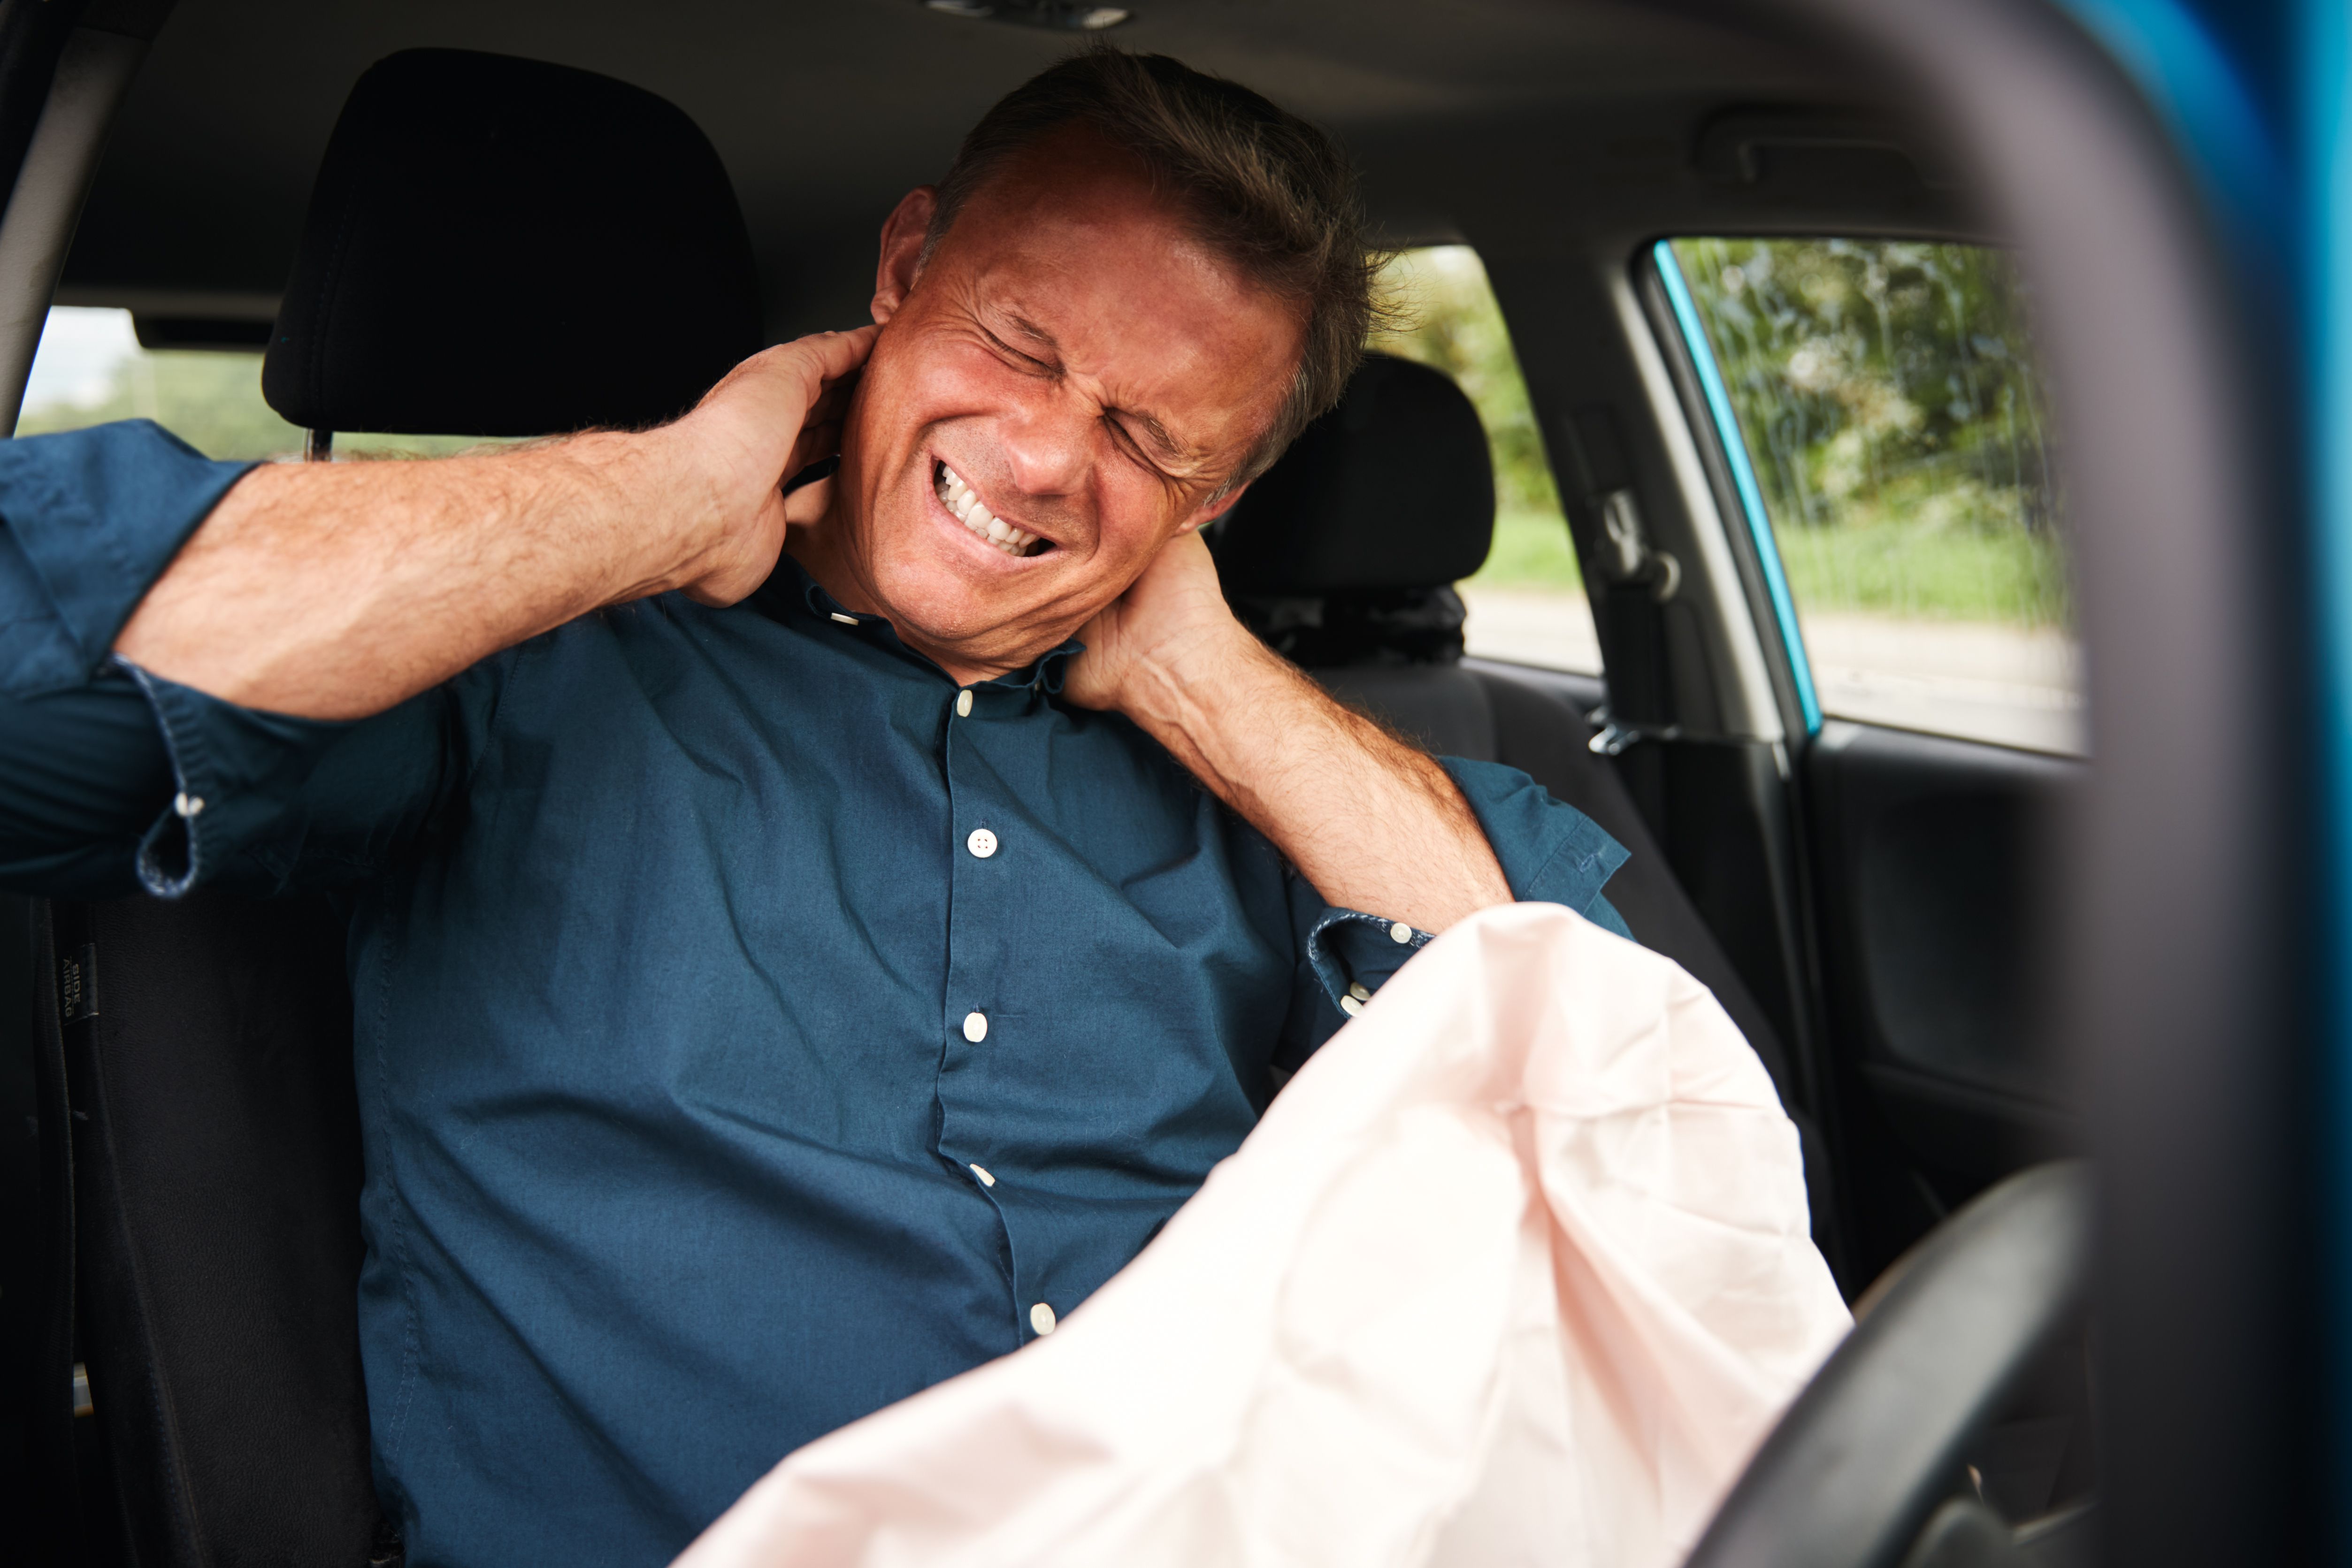 Signs and Symptoms of Whiplash